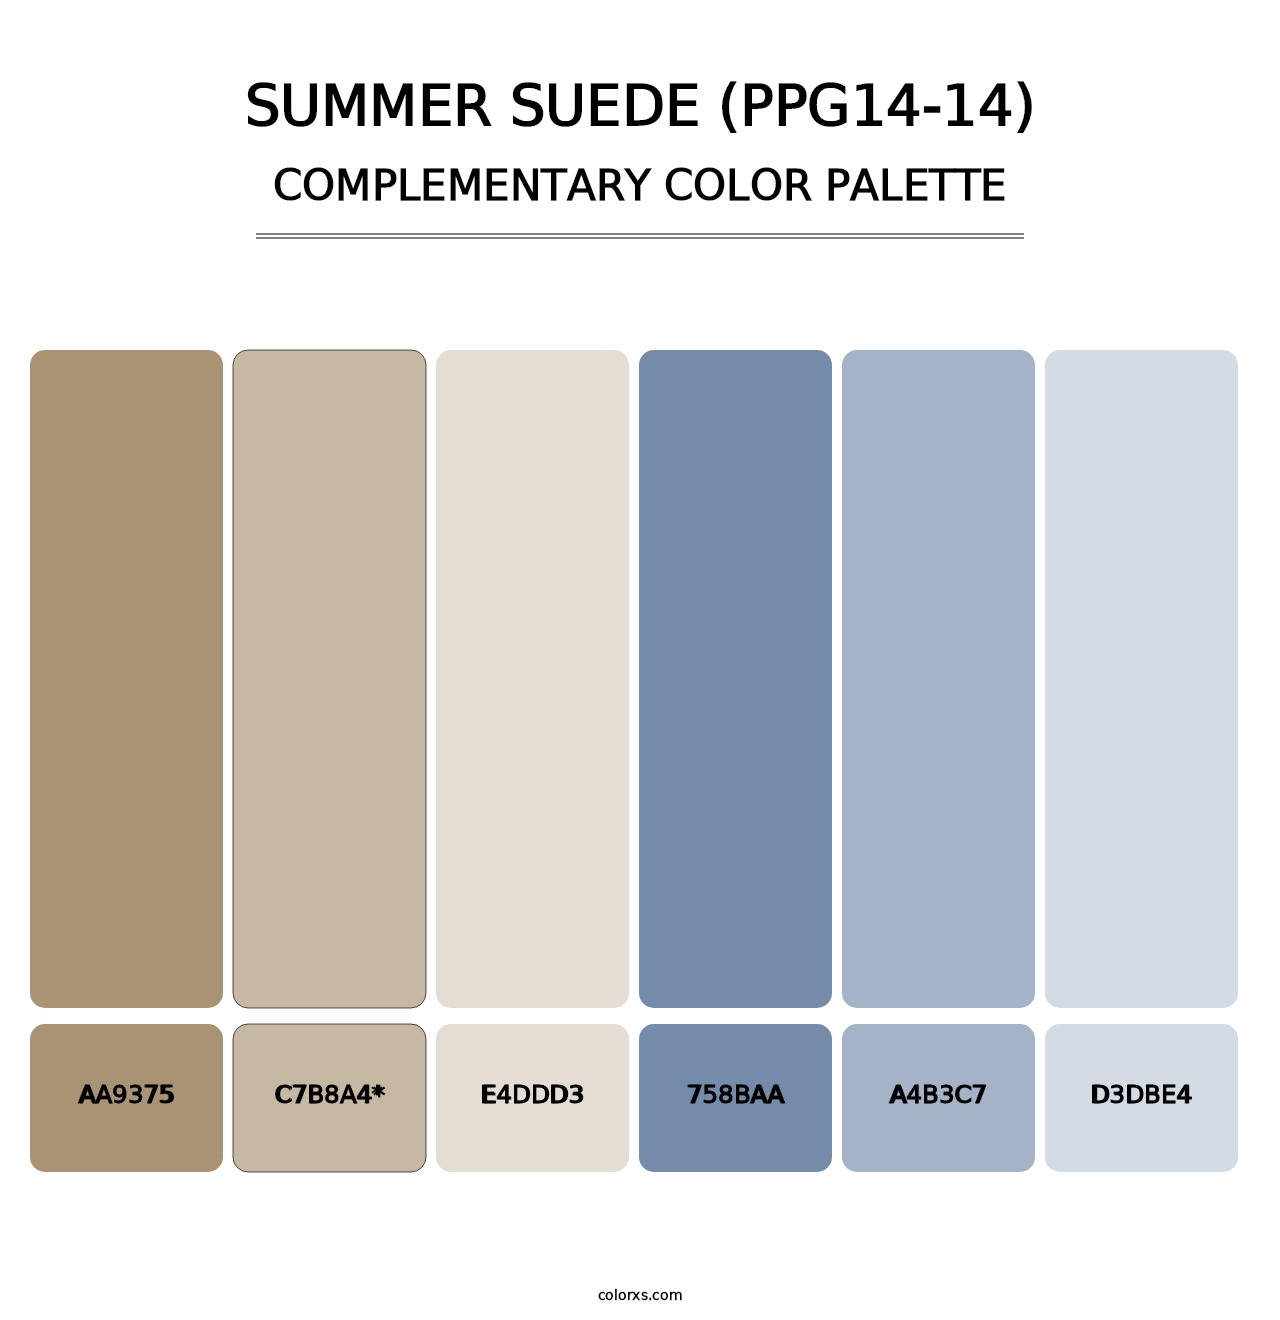 Summer Suede (PPG14-14) - Complementary Color Palette